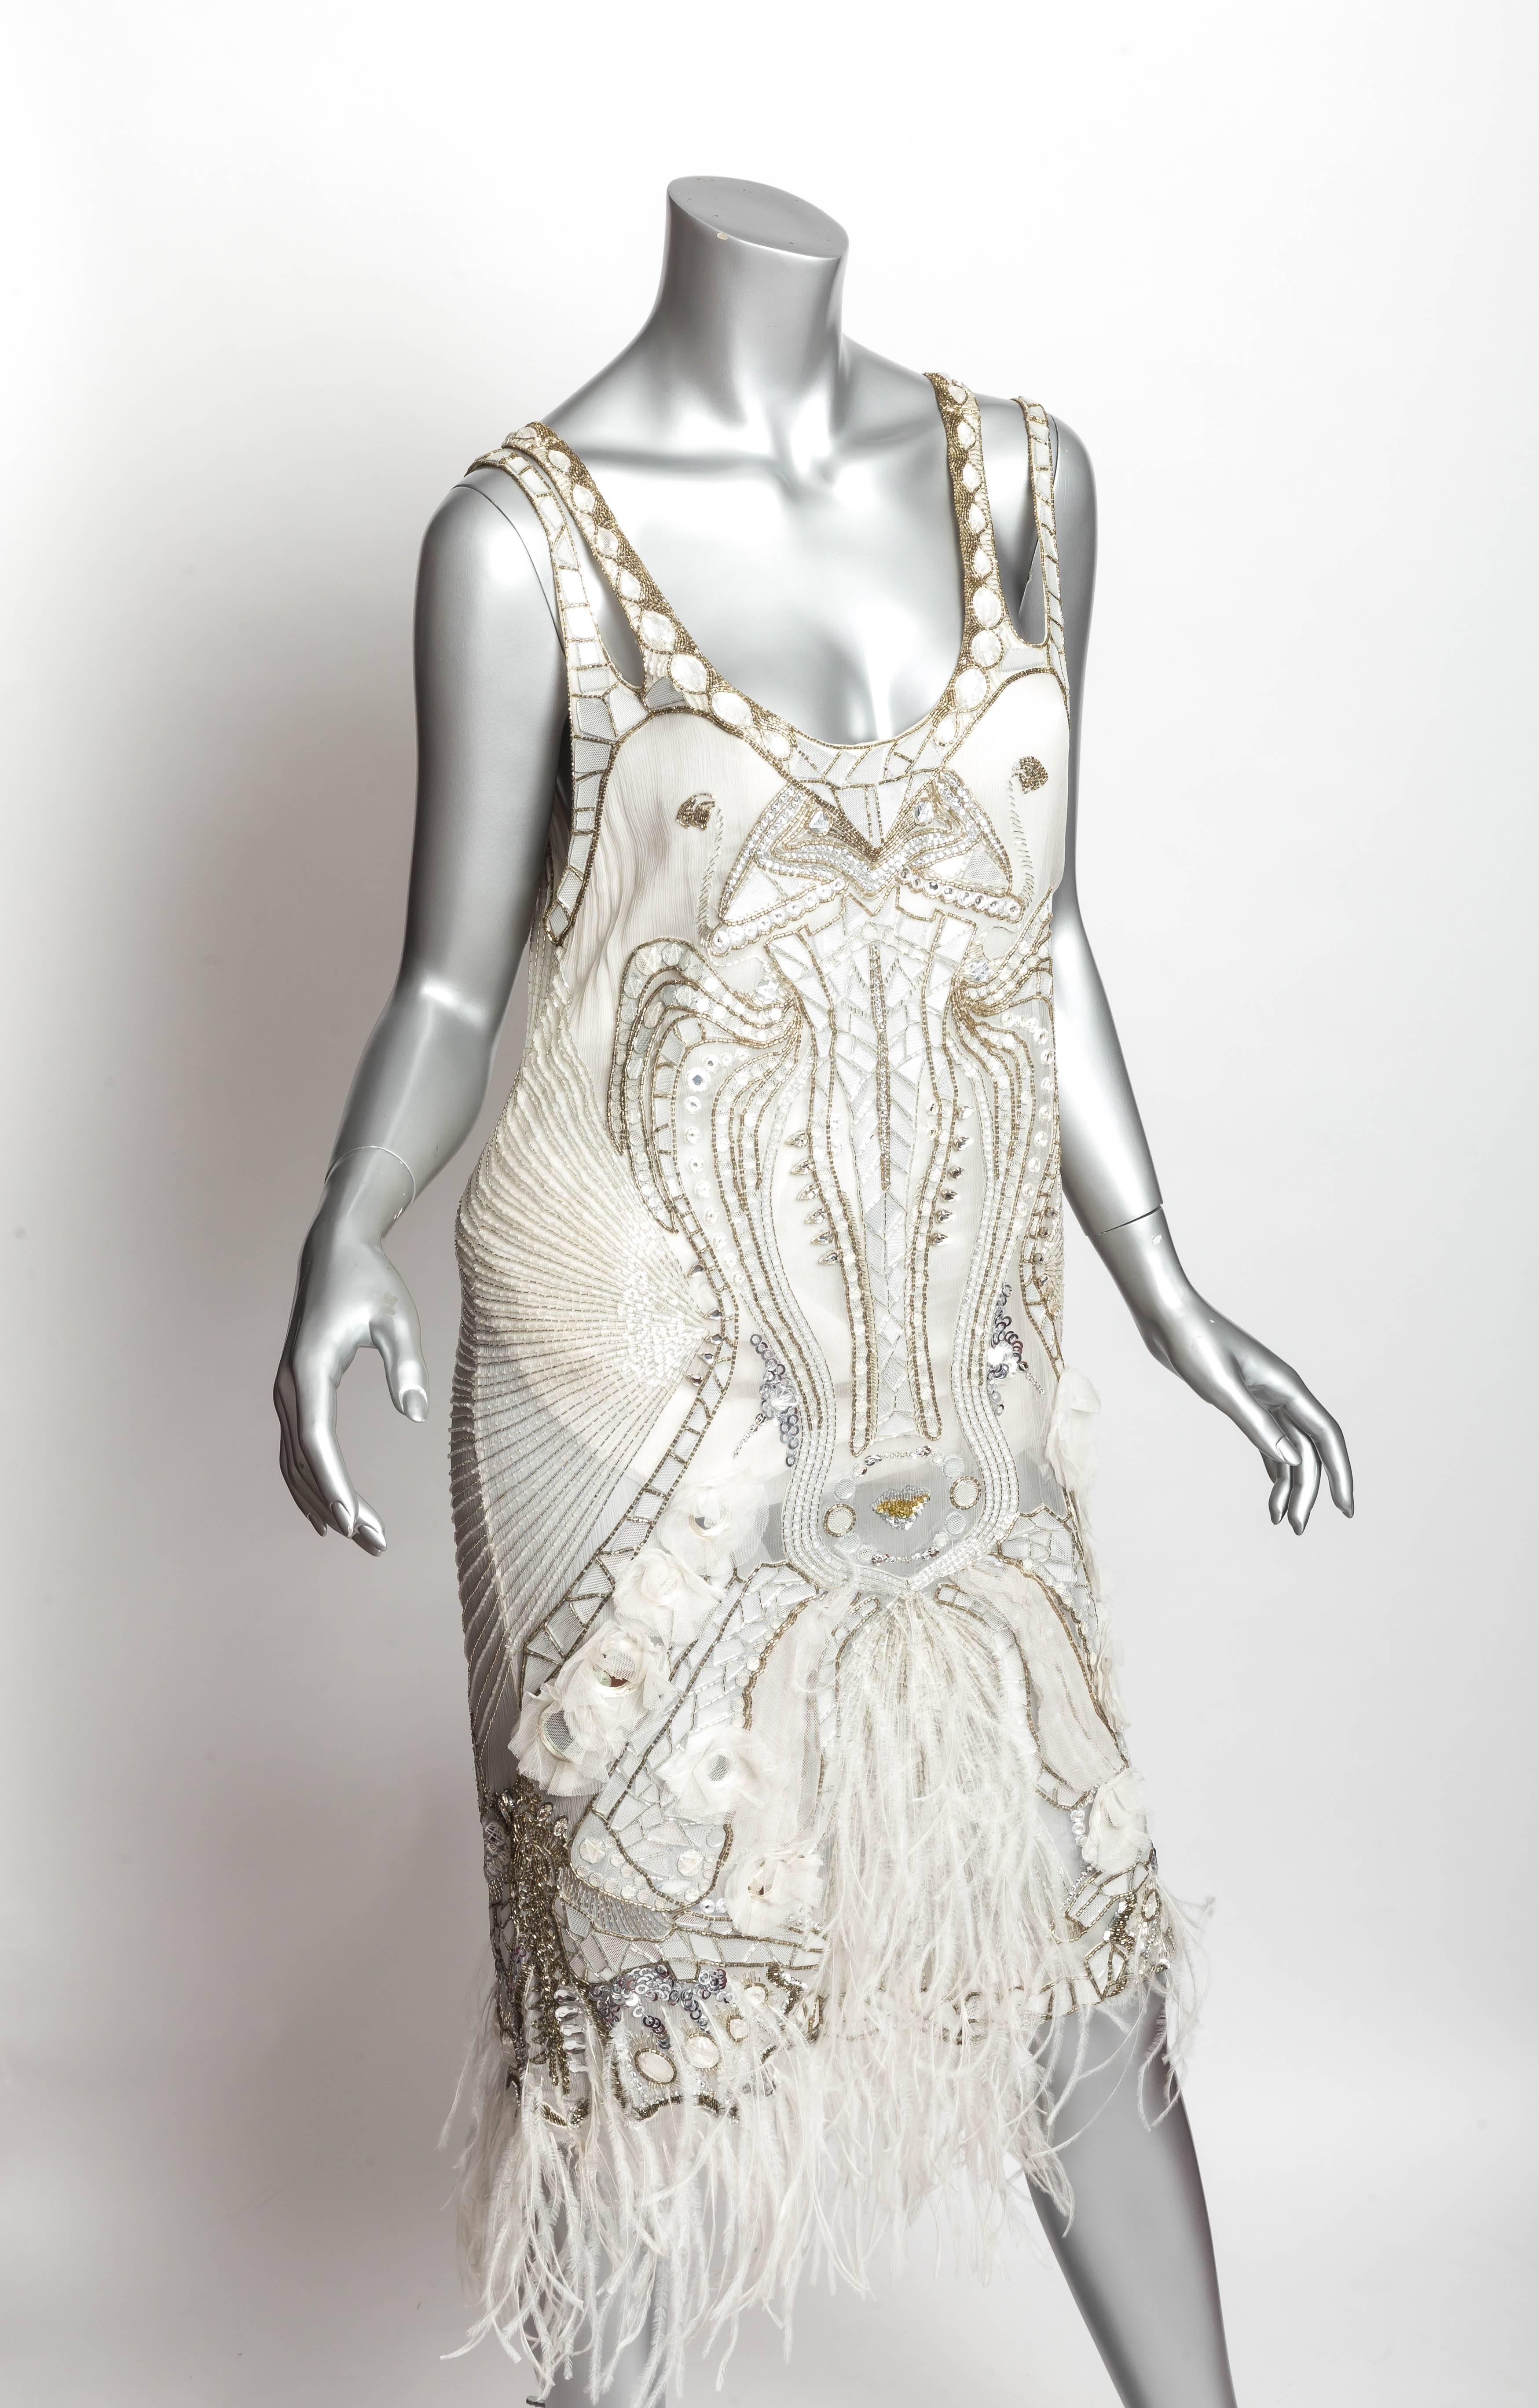 Absolutely stunning Emanuel Ungaro Paris cocktail dress in off white with illusion netting trim. Small pieces of mirror outline the lines of this dress which is also embellished with beads, faceted glass  and ostrich feathers. 
Size 44
